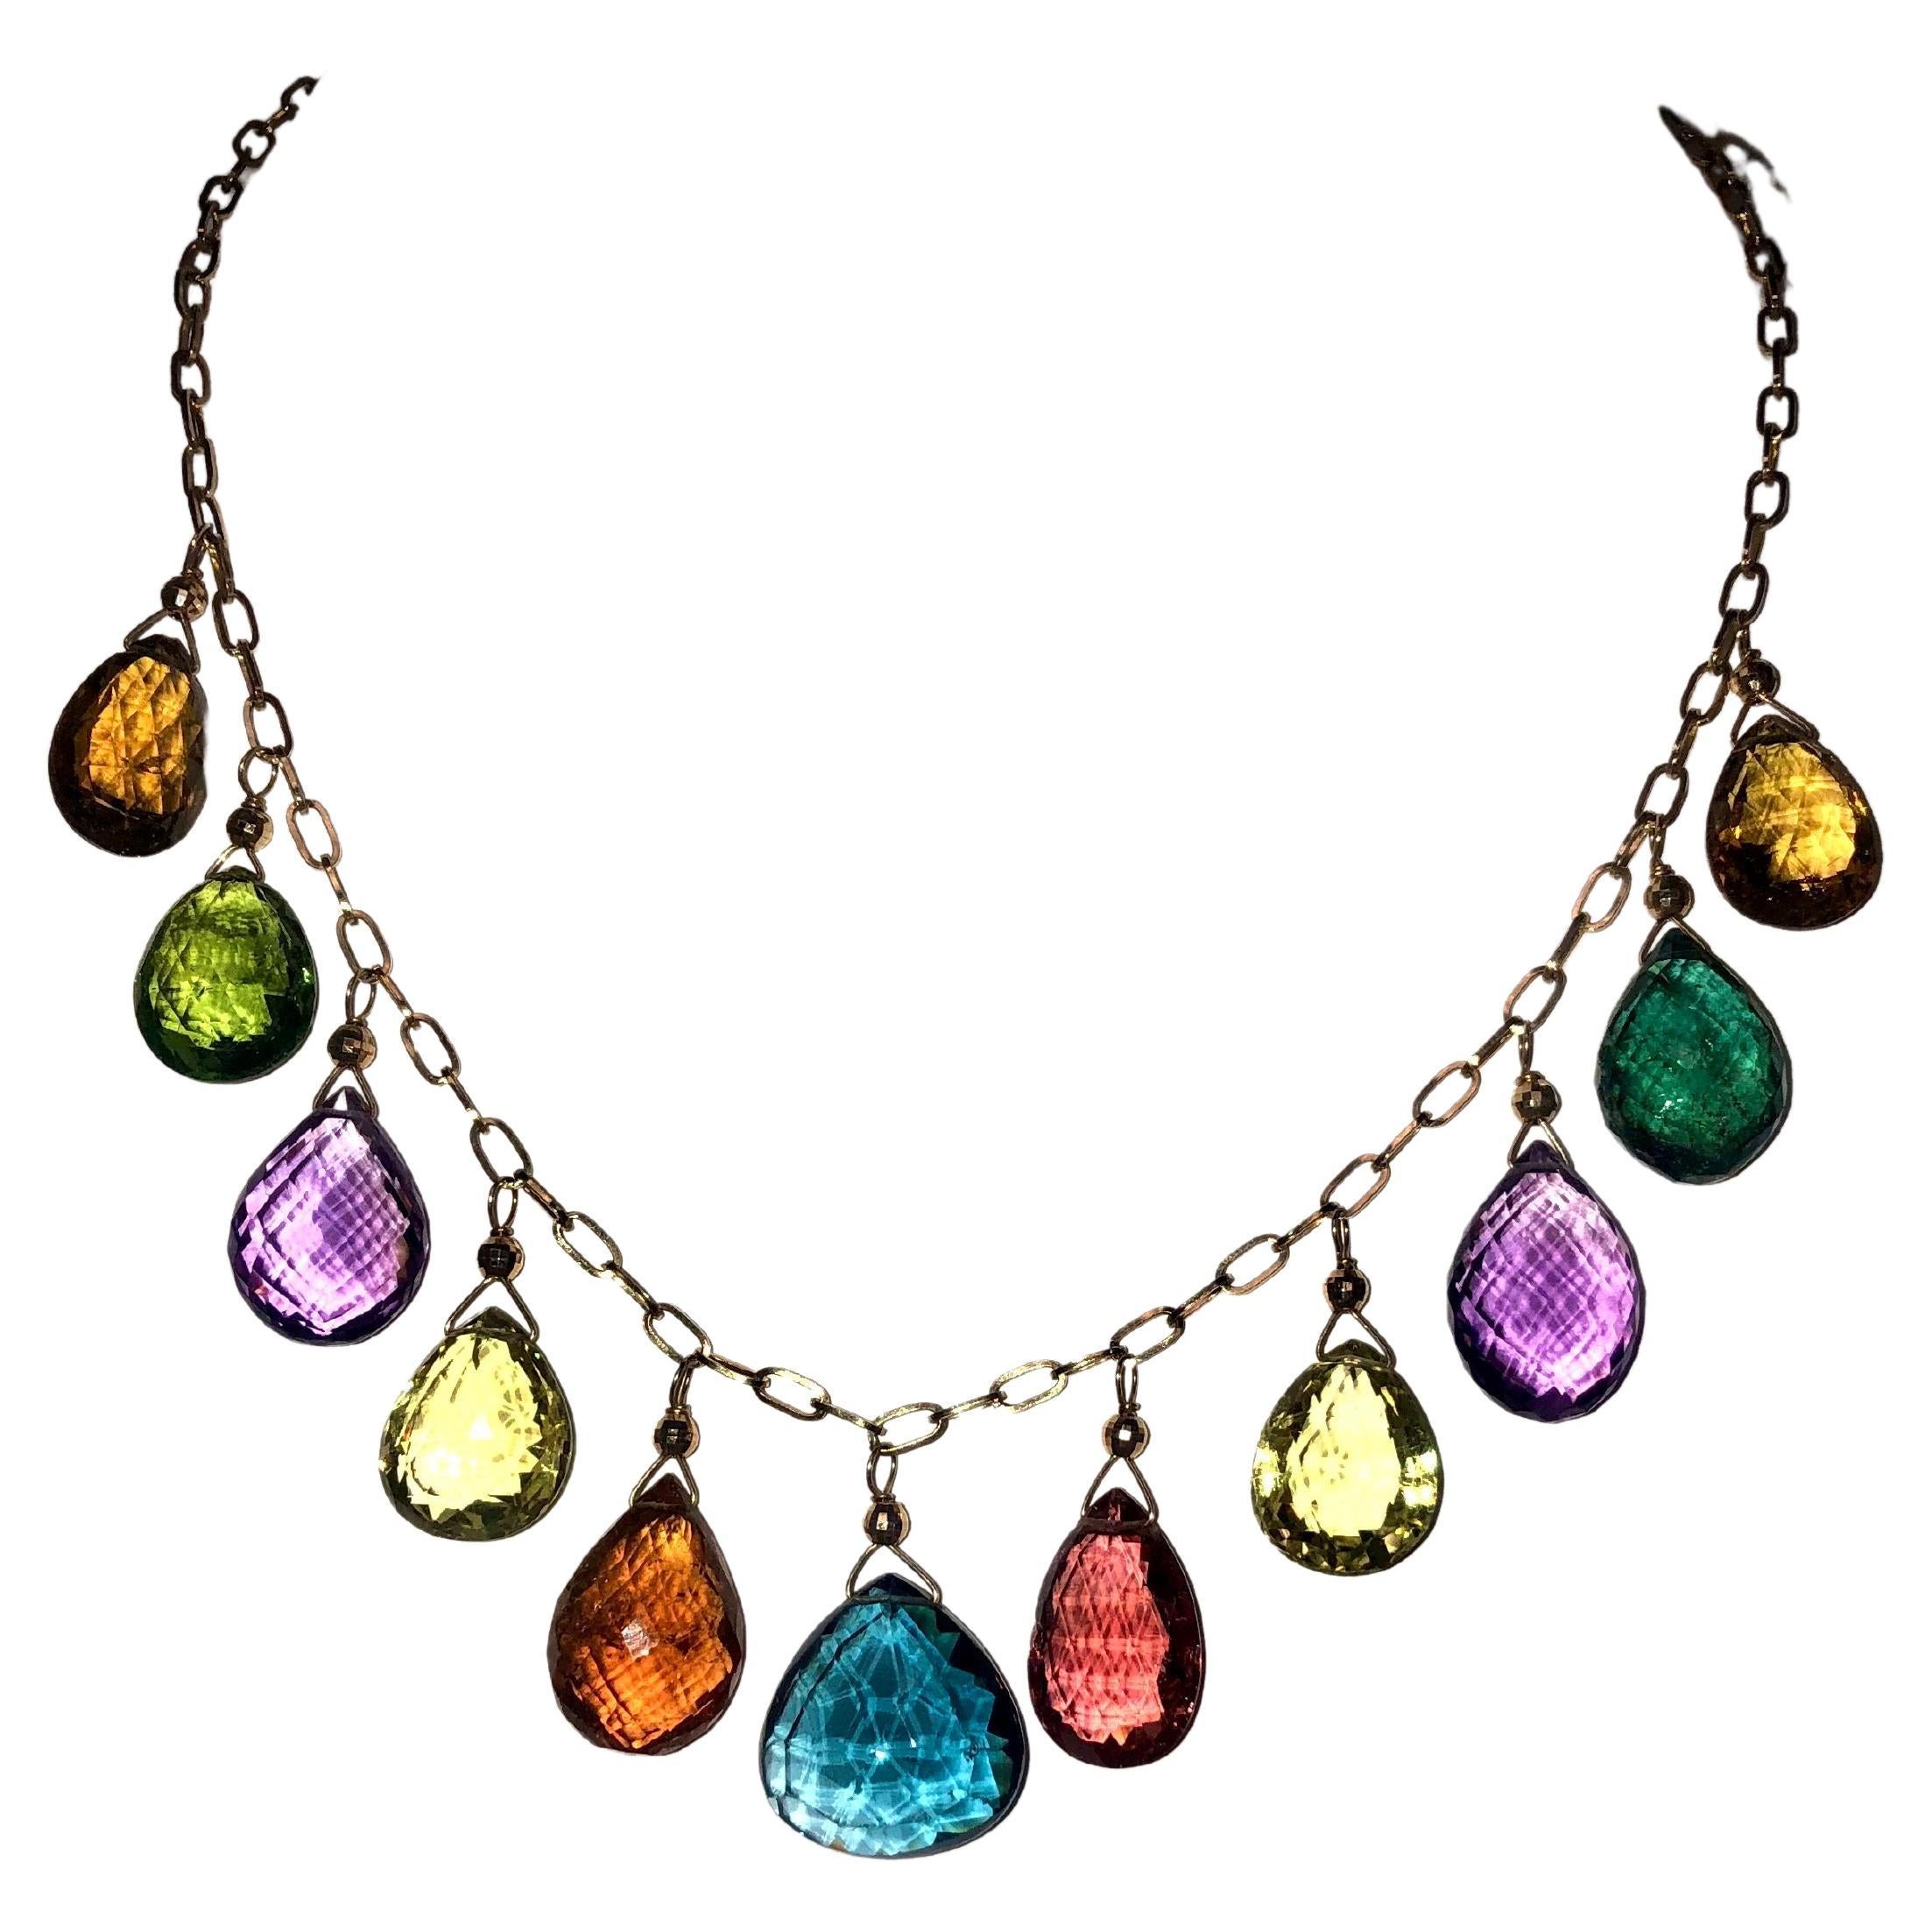 Description
Vibrant Multicolor Tourmalines, Amethyst, Lemon Quartz and London Blue Topaz necklace with an impressive 118 carat total weight dangle from a gold chain.
Item # N2272

Materials and Weight
Tourmalines, 6 stones, drop shape, 56